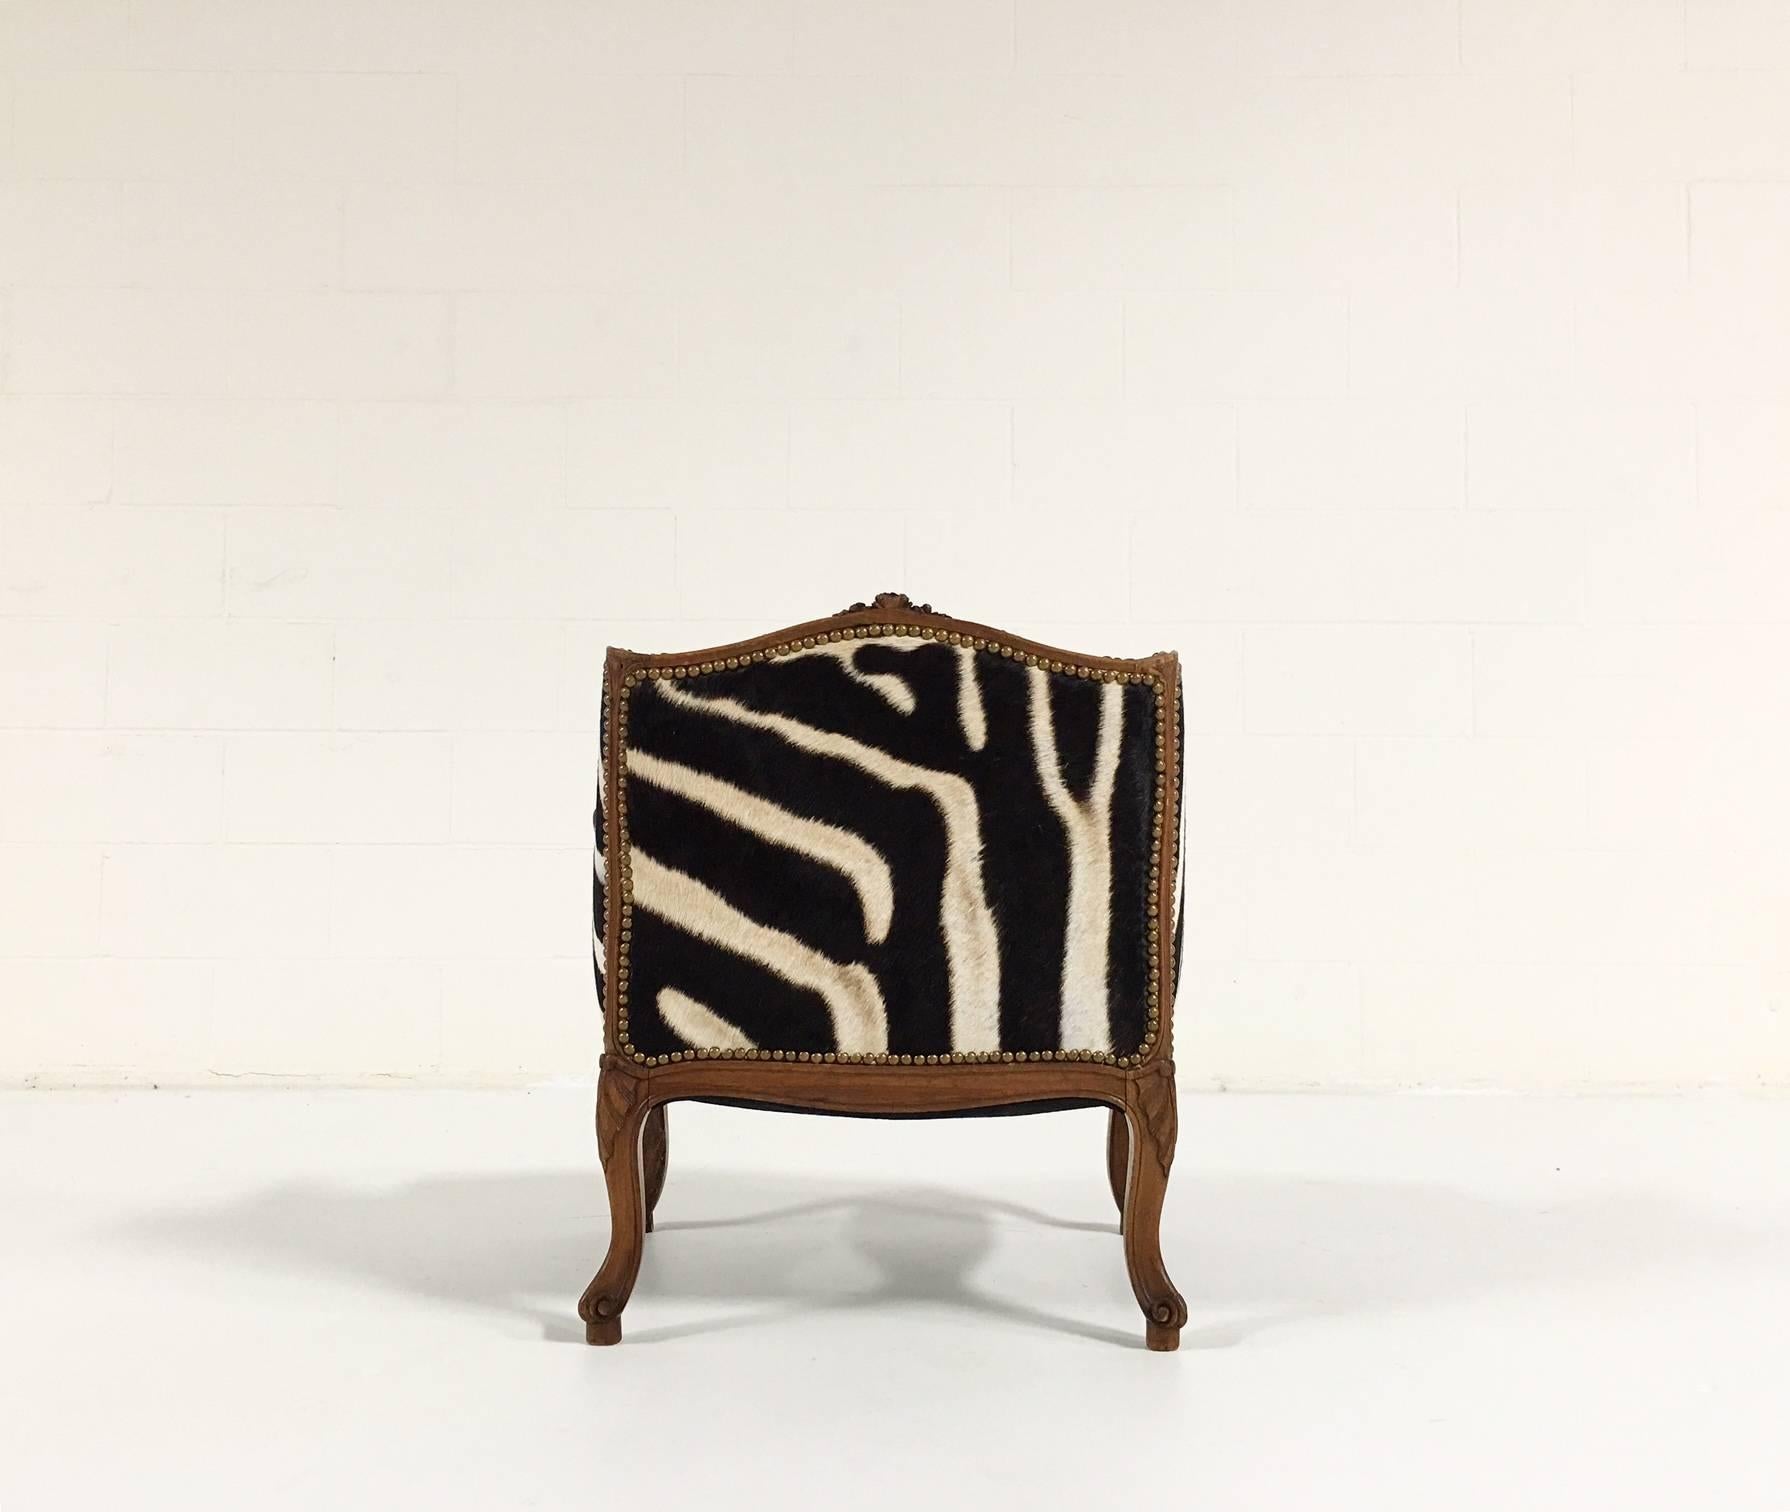 20th Century Small Vintage Carved Chair in Zebra Hide